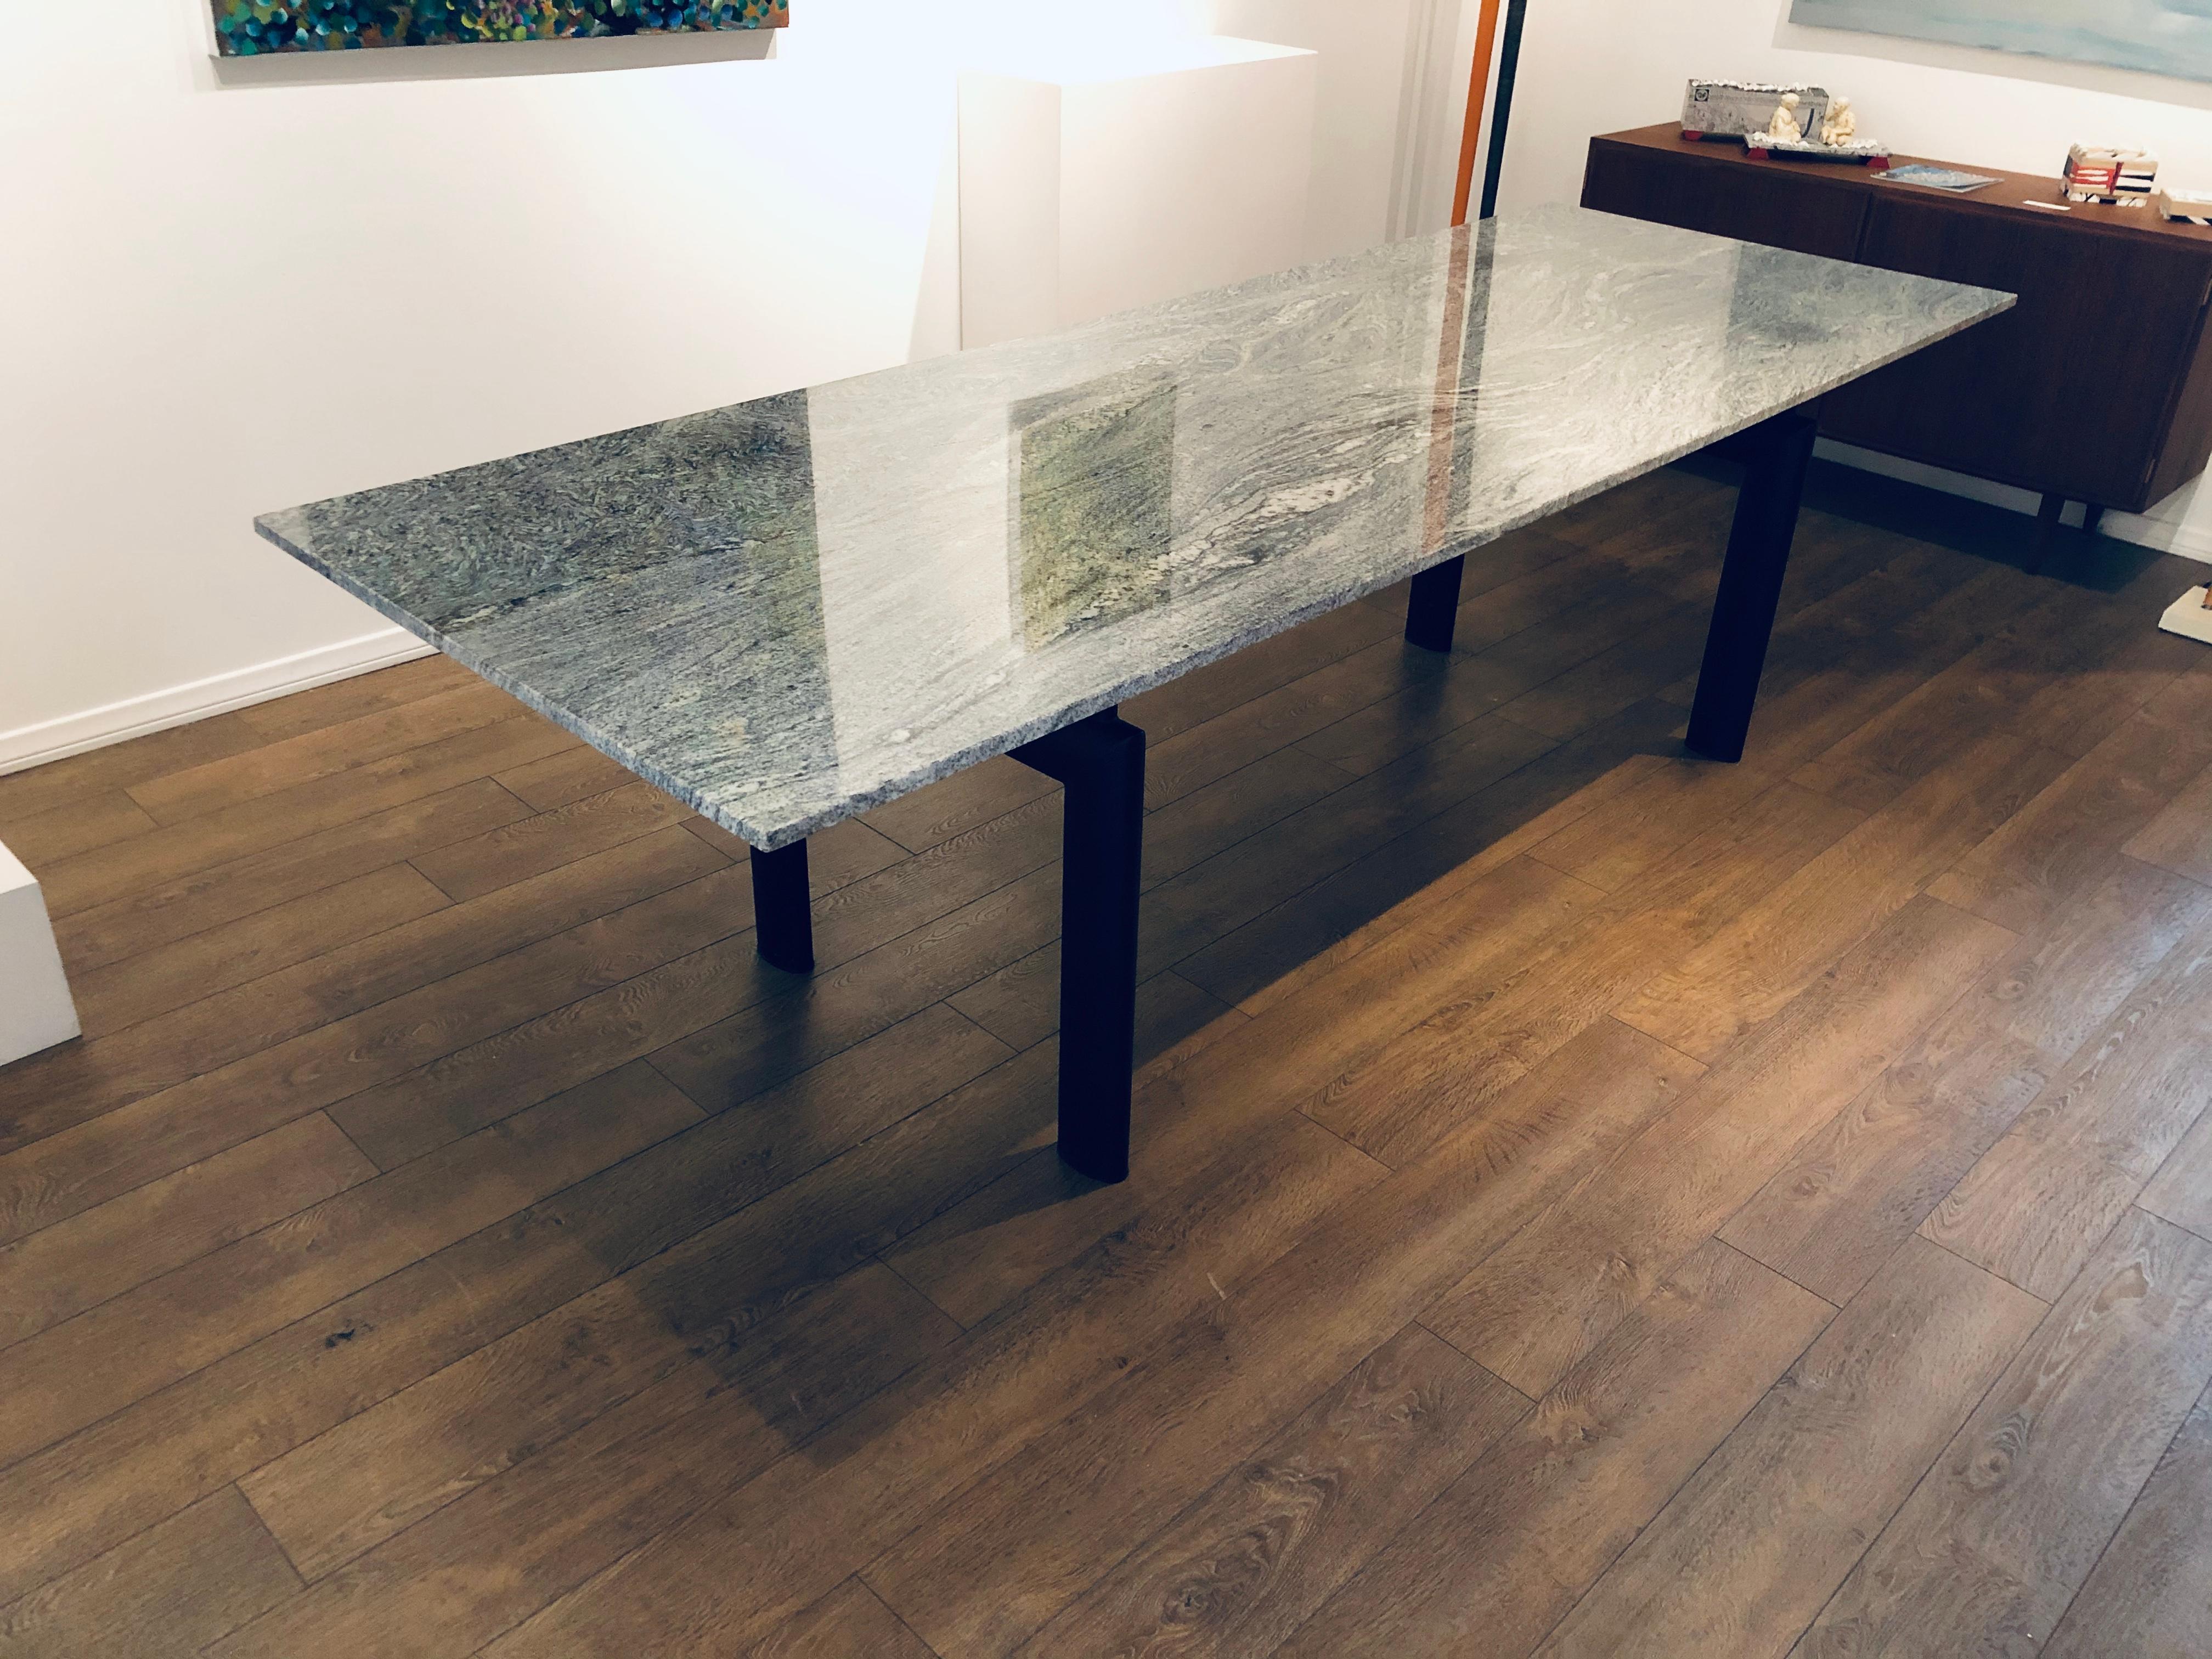 One of a kind striking extra large dining table with solid granite top and metal base, this table can seat up to 12 people, its minimalistic look, fits in every space. The grain on this granite its beautiful solid and no chips or cracks.